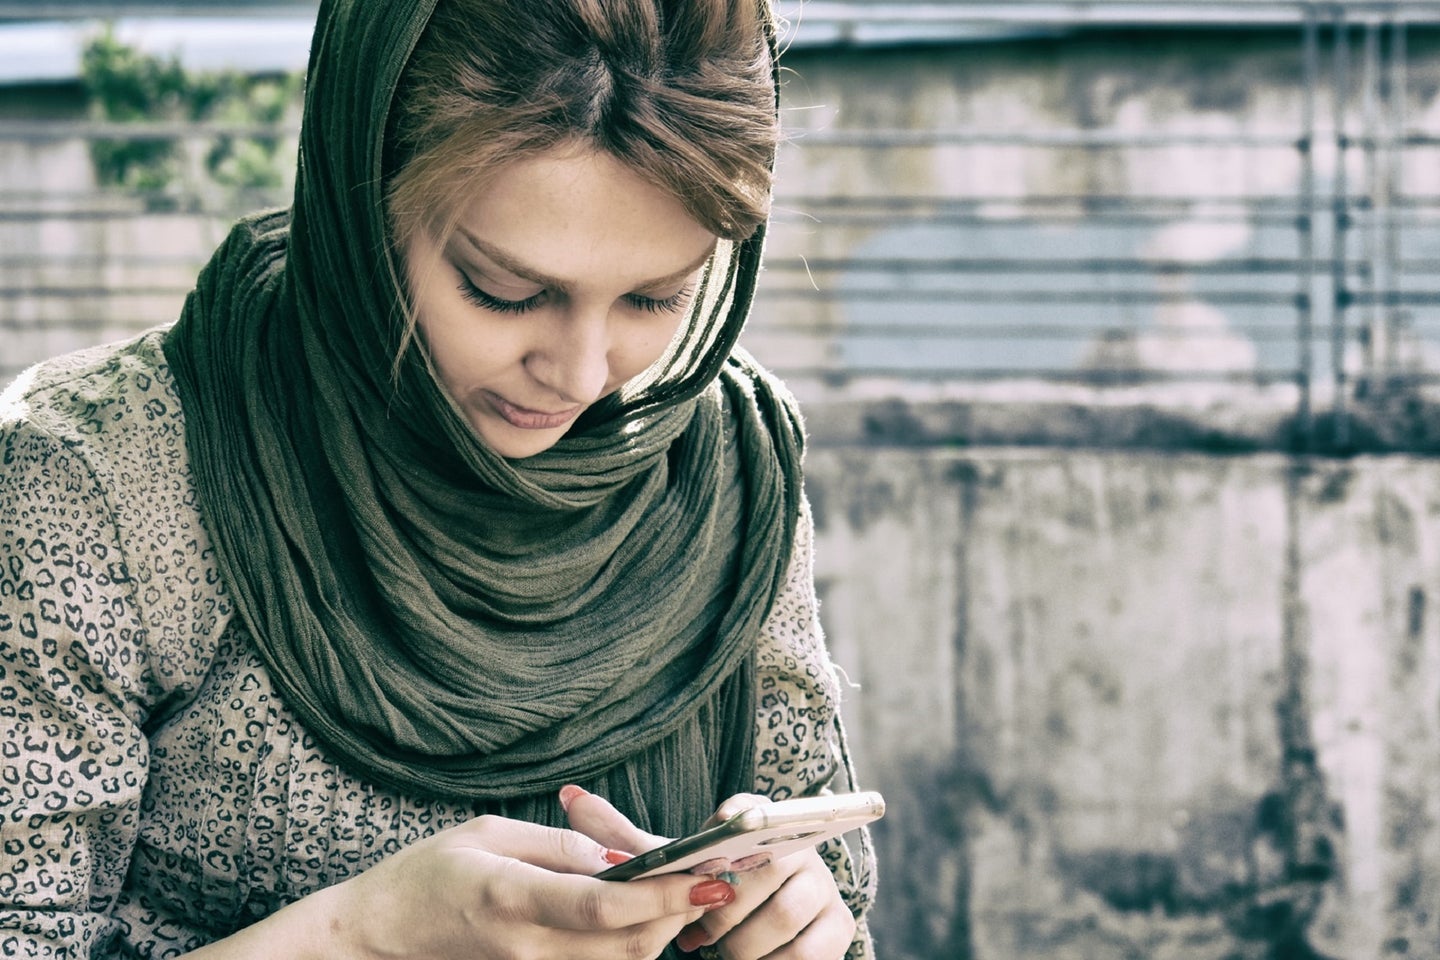 Person with brown hair, leopard-print shirt, and black scarf texting on a smartphone